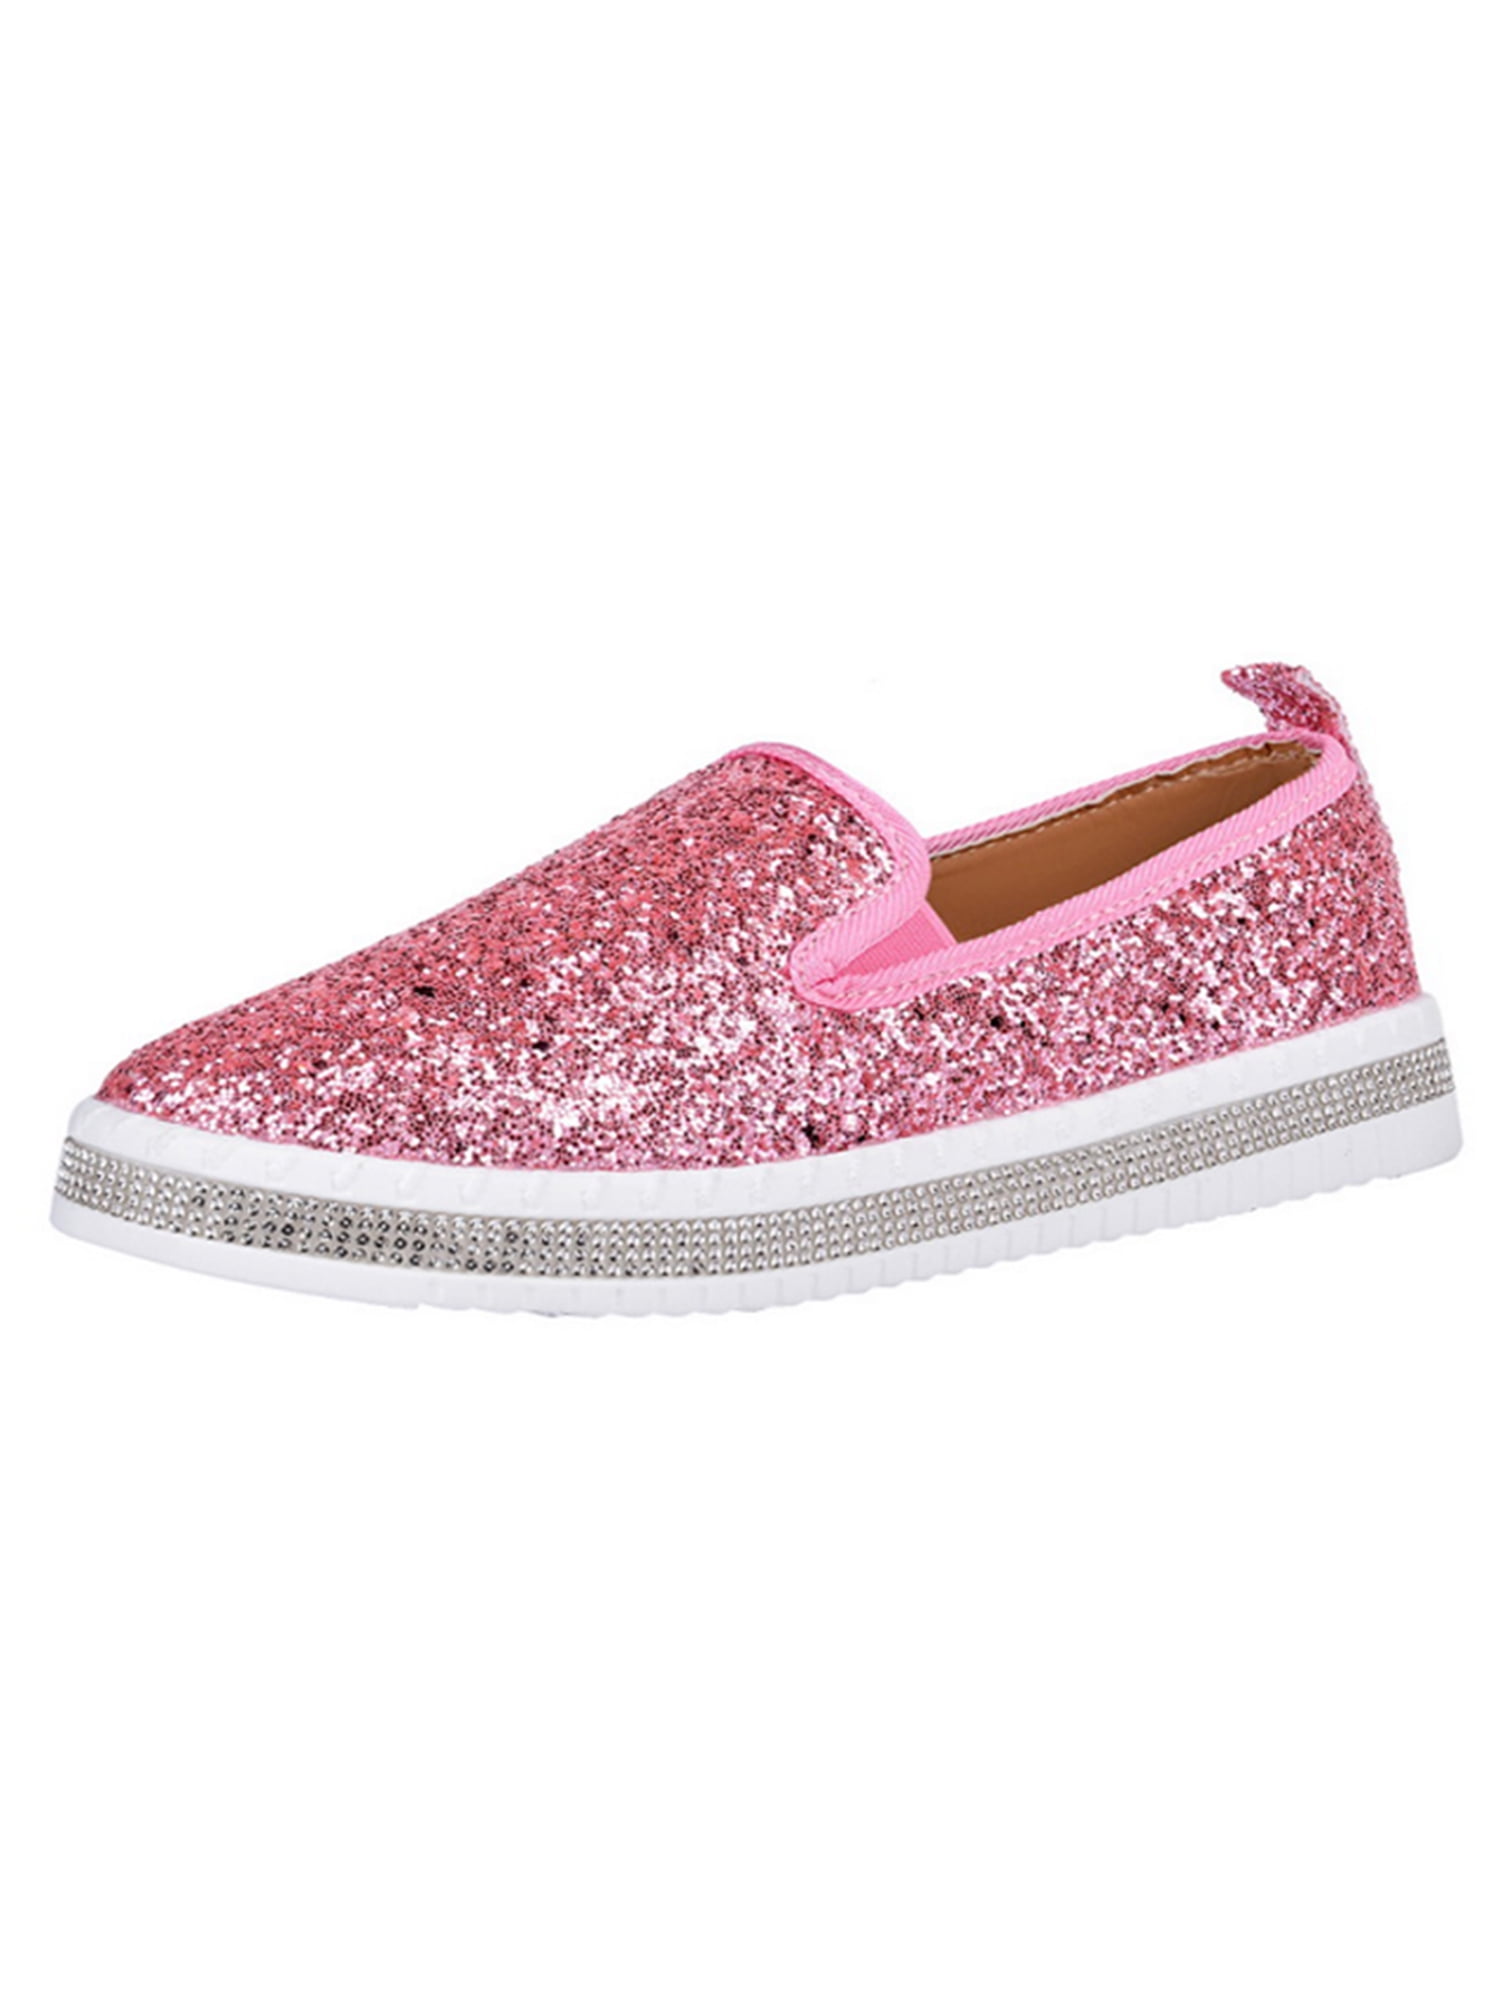 Sequins Flat Trainers Shoes Casual Low 